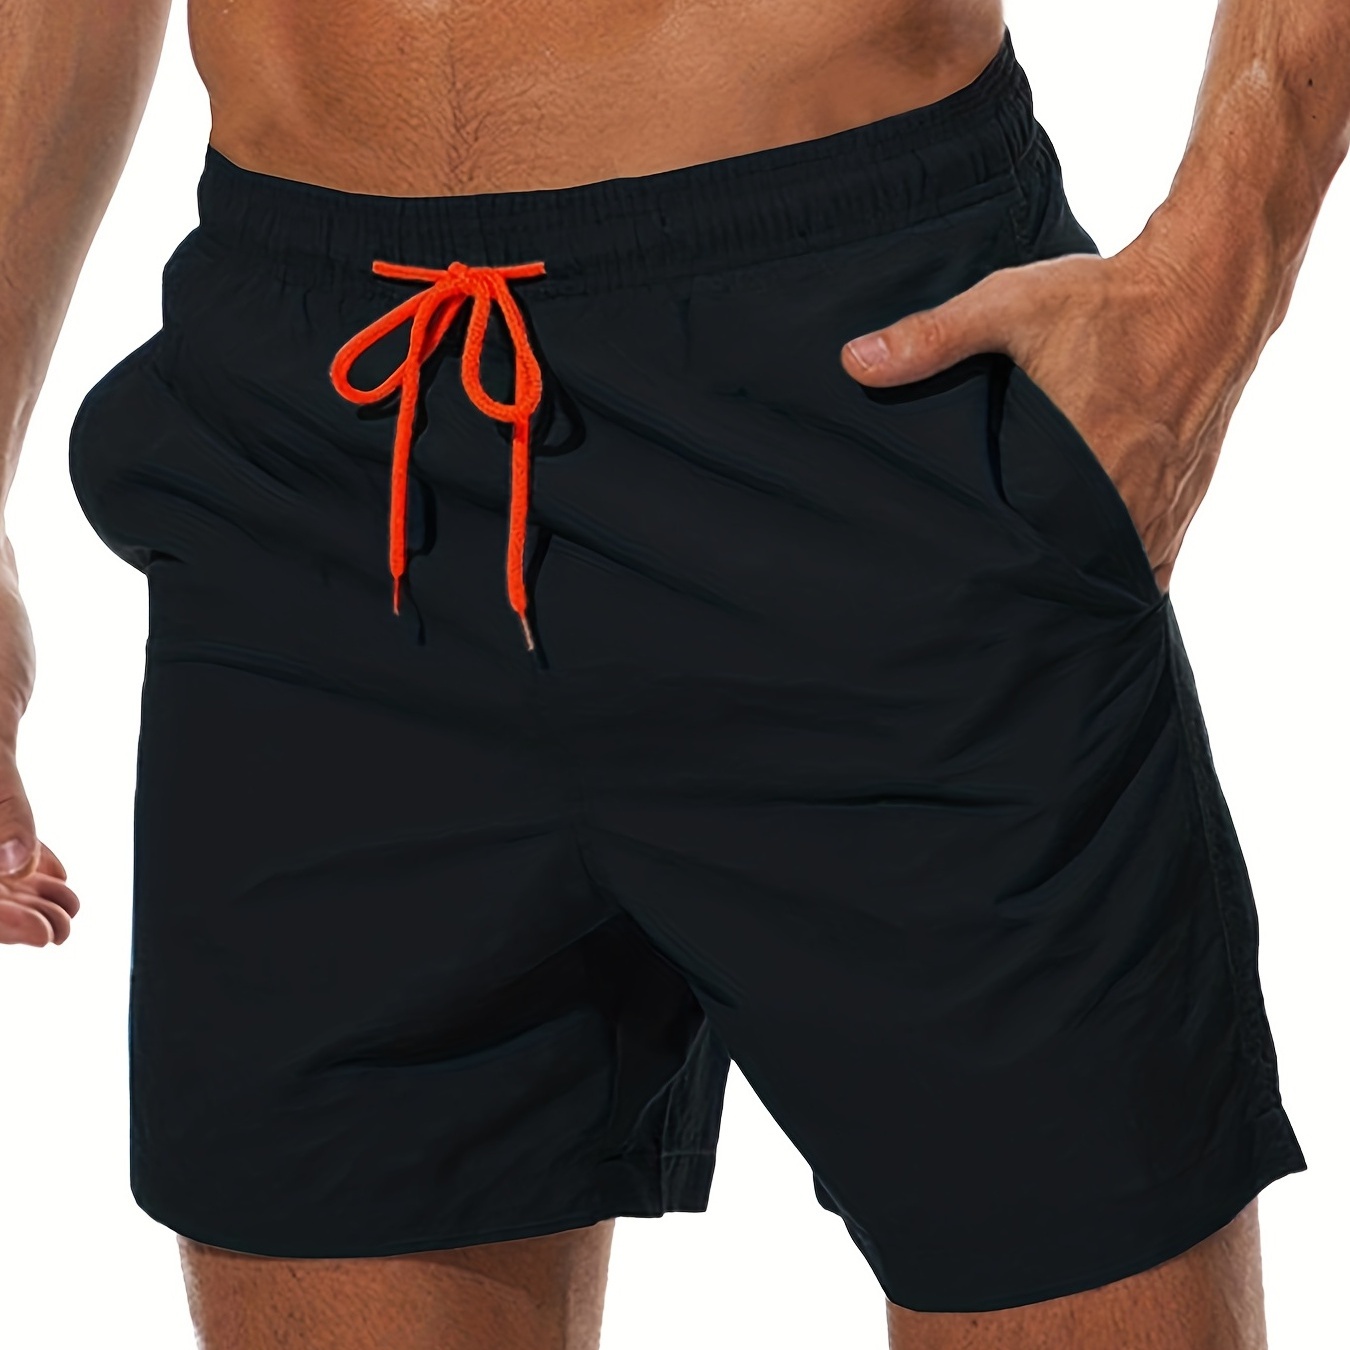 

Men's Quick-dry Swimming Trunks, Beach Shorts With Mesh Lining, Drawstring Side Pockets Shorts For Swimming, Mens Clothing